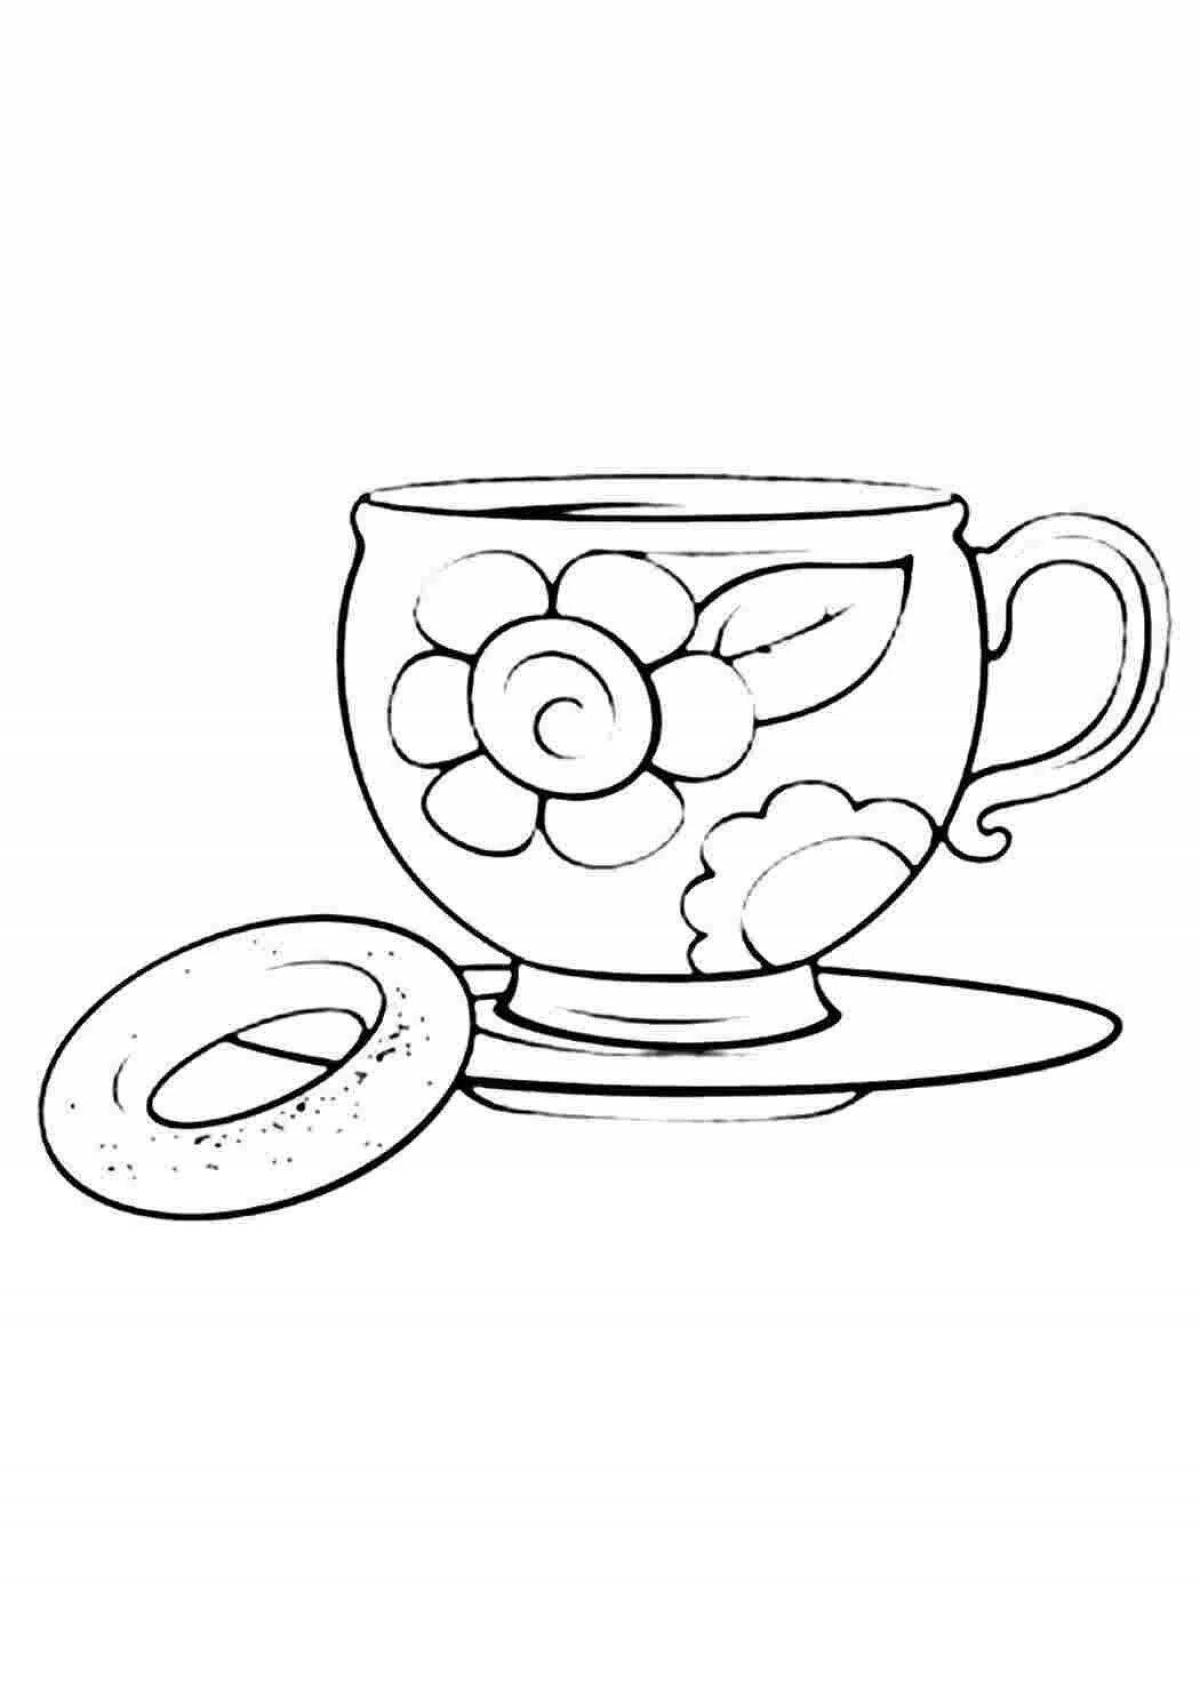 Perfect bowl coloring book for students